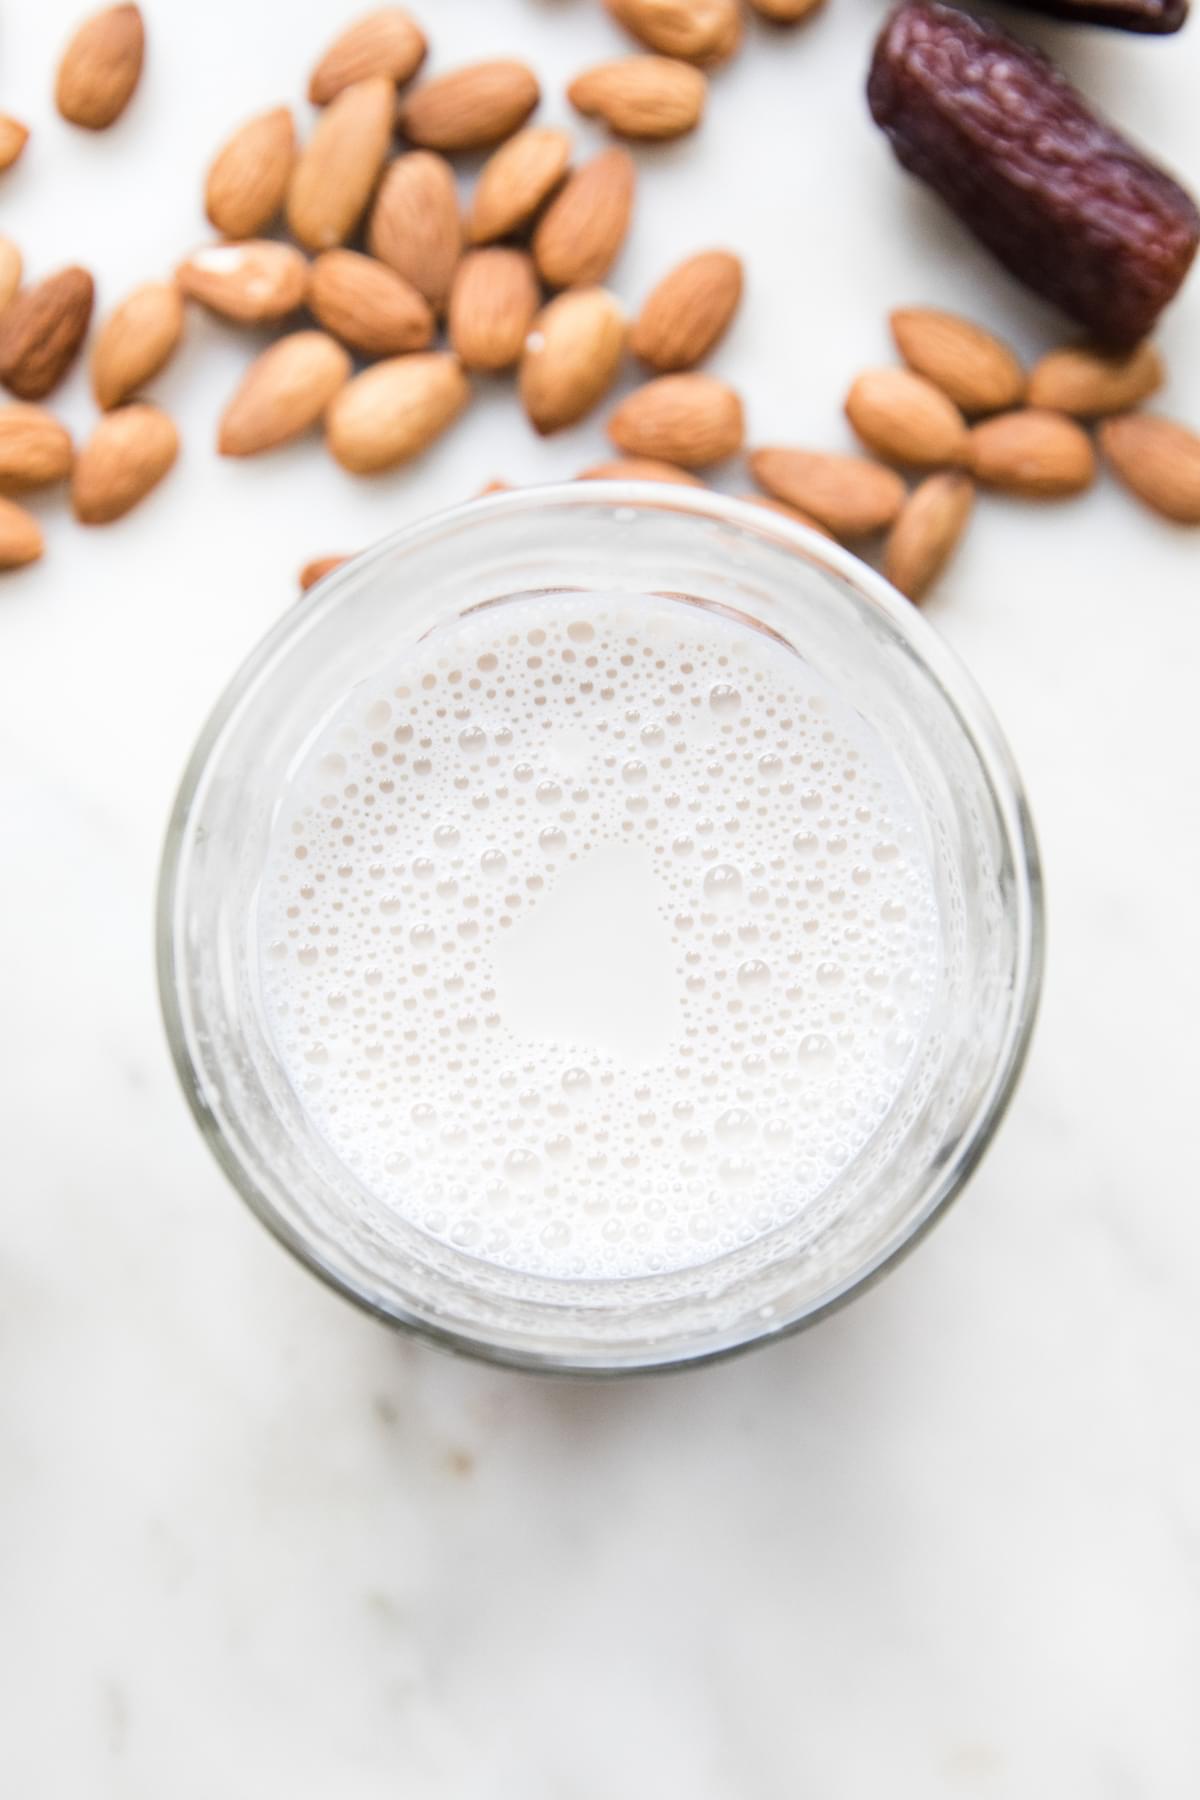 a glass of homemade almond milk sitting on the counter surrounded by almonds and dates